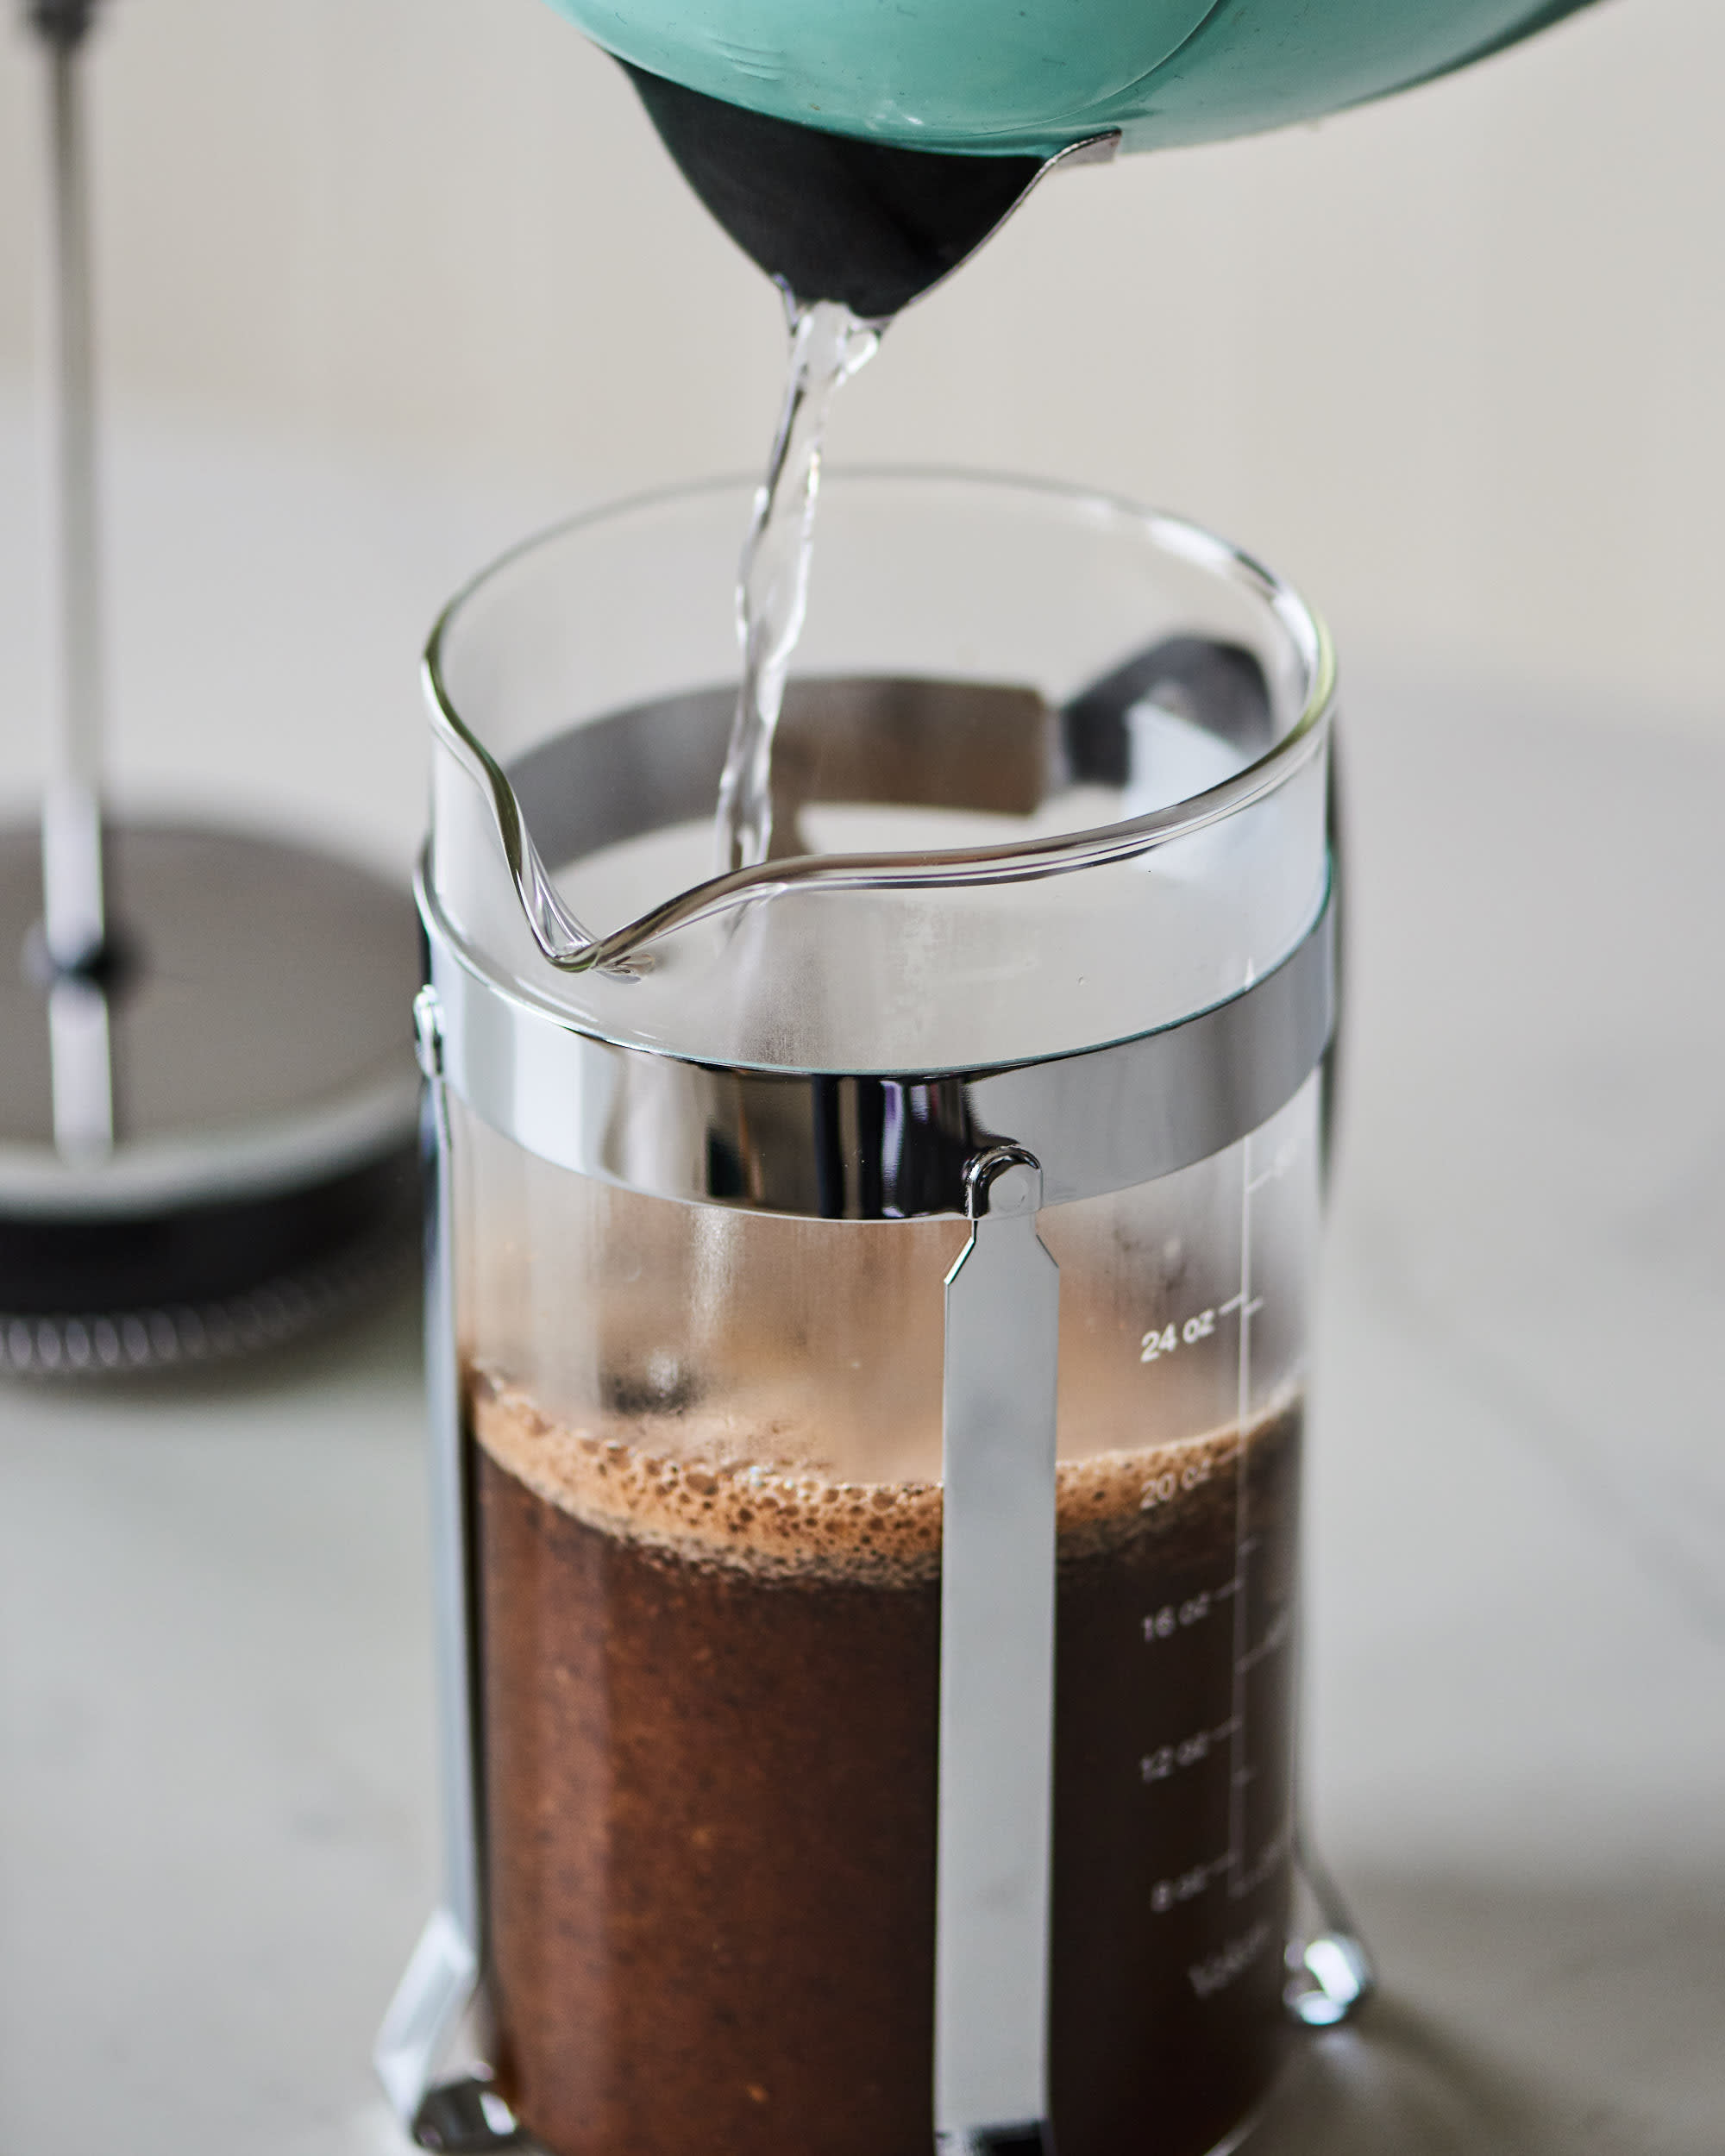 5 tools for making better coffee at home, according to caffeine aficionados